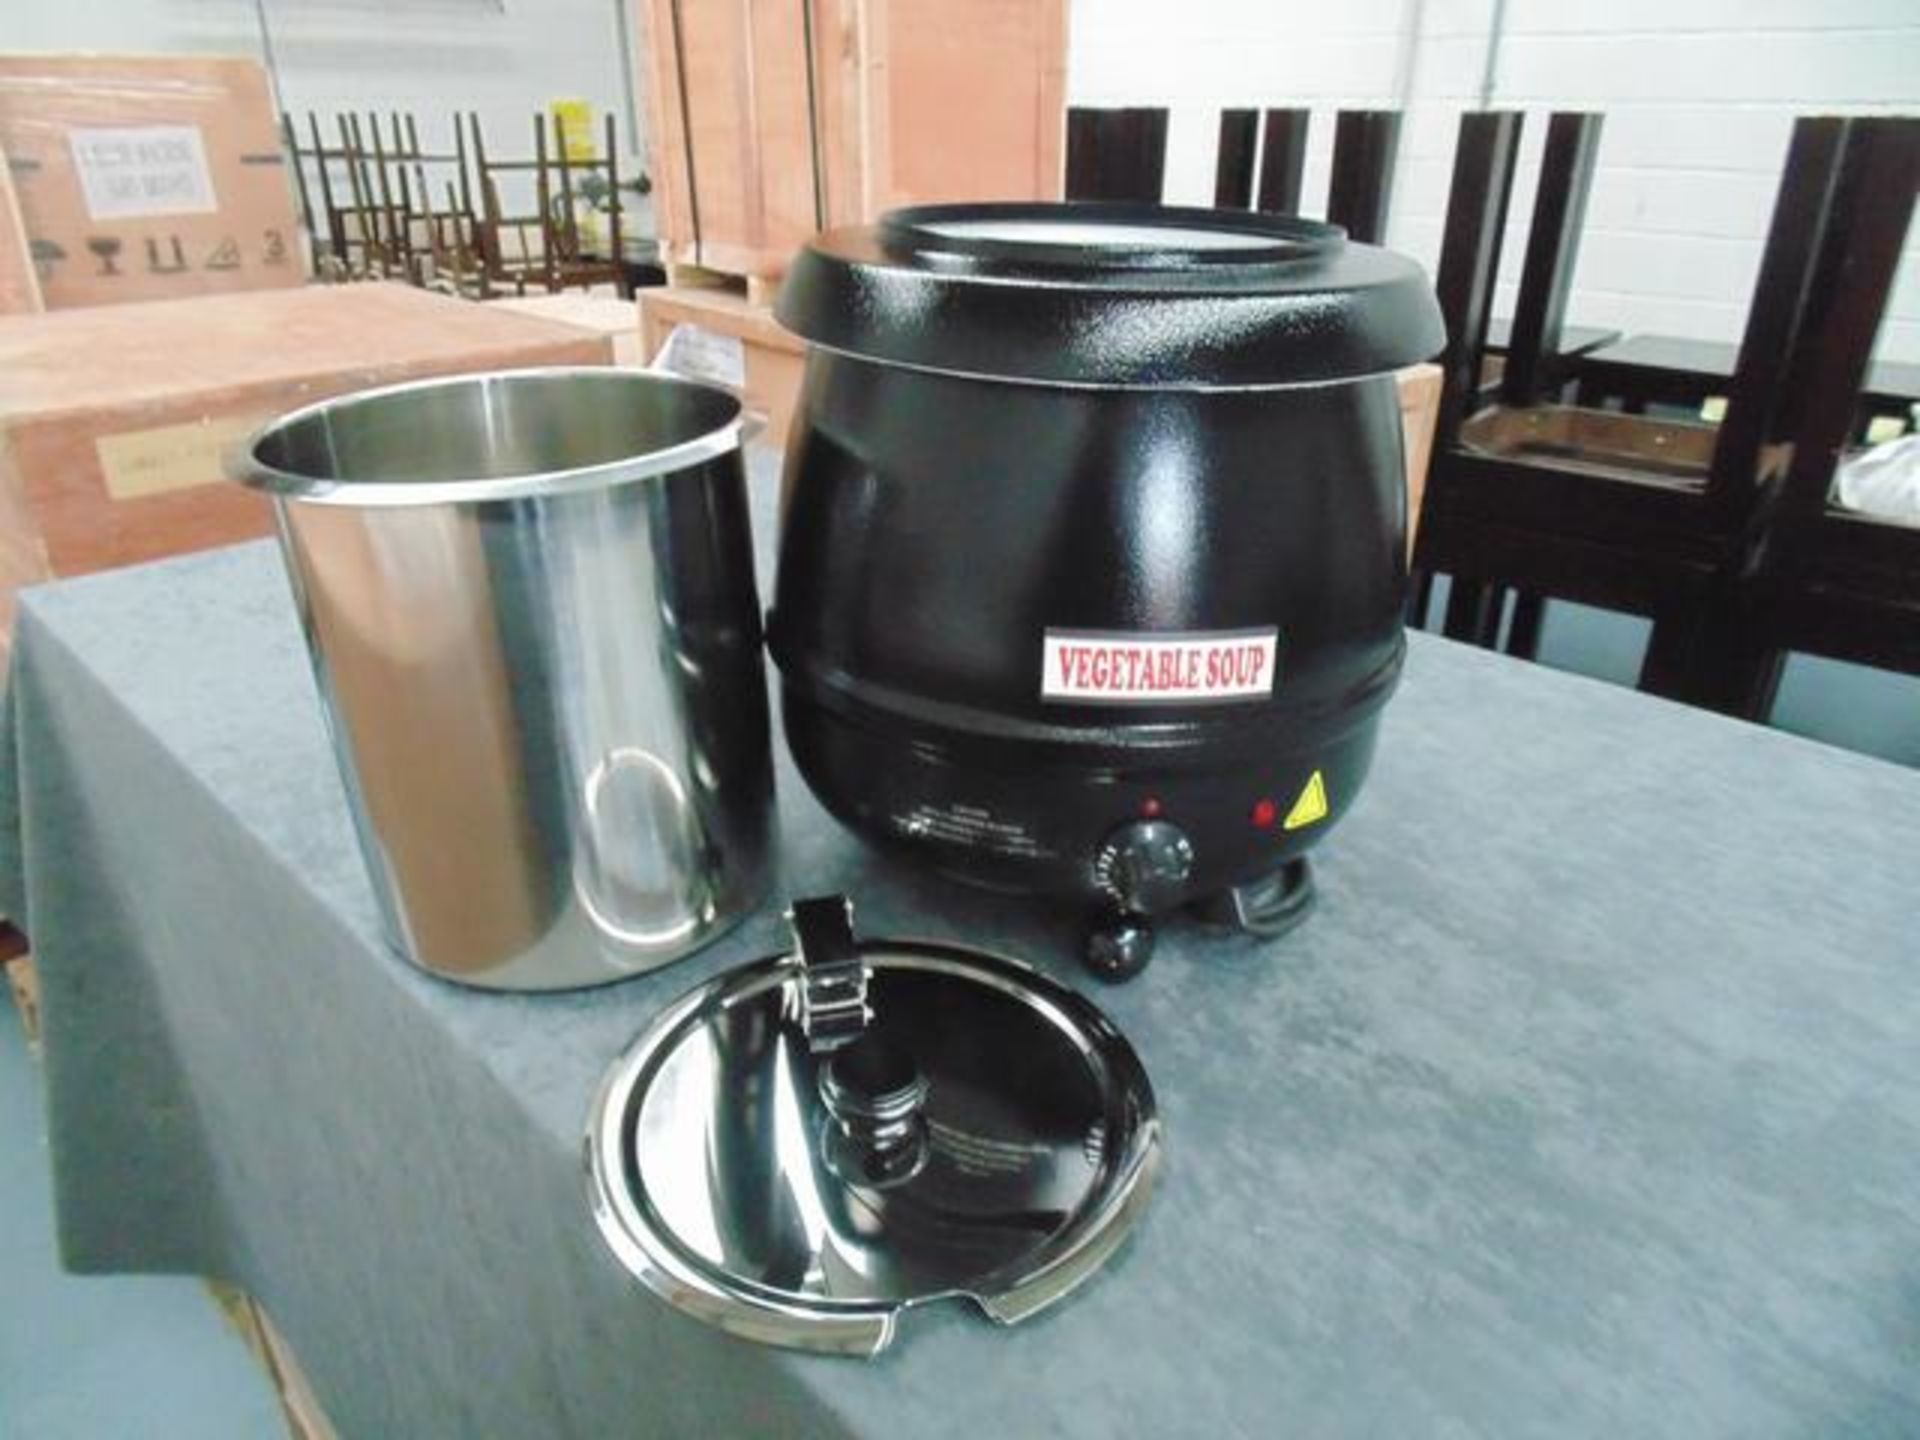 Soup kettle 10 litre wet heat only operation variable simmerstat maximum temperature: 98°C 240v - Image 2 of 2